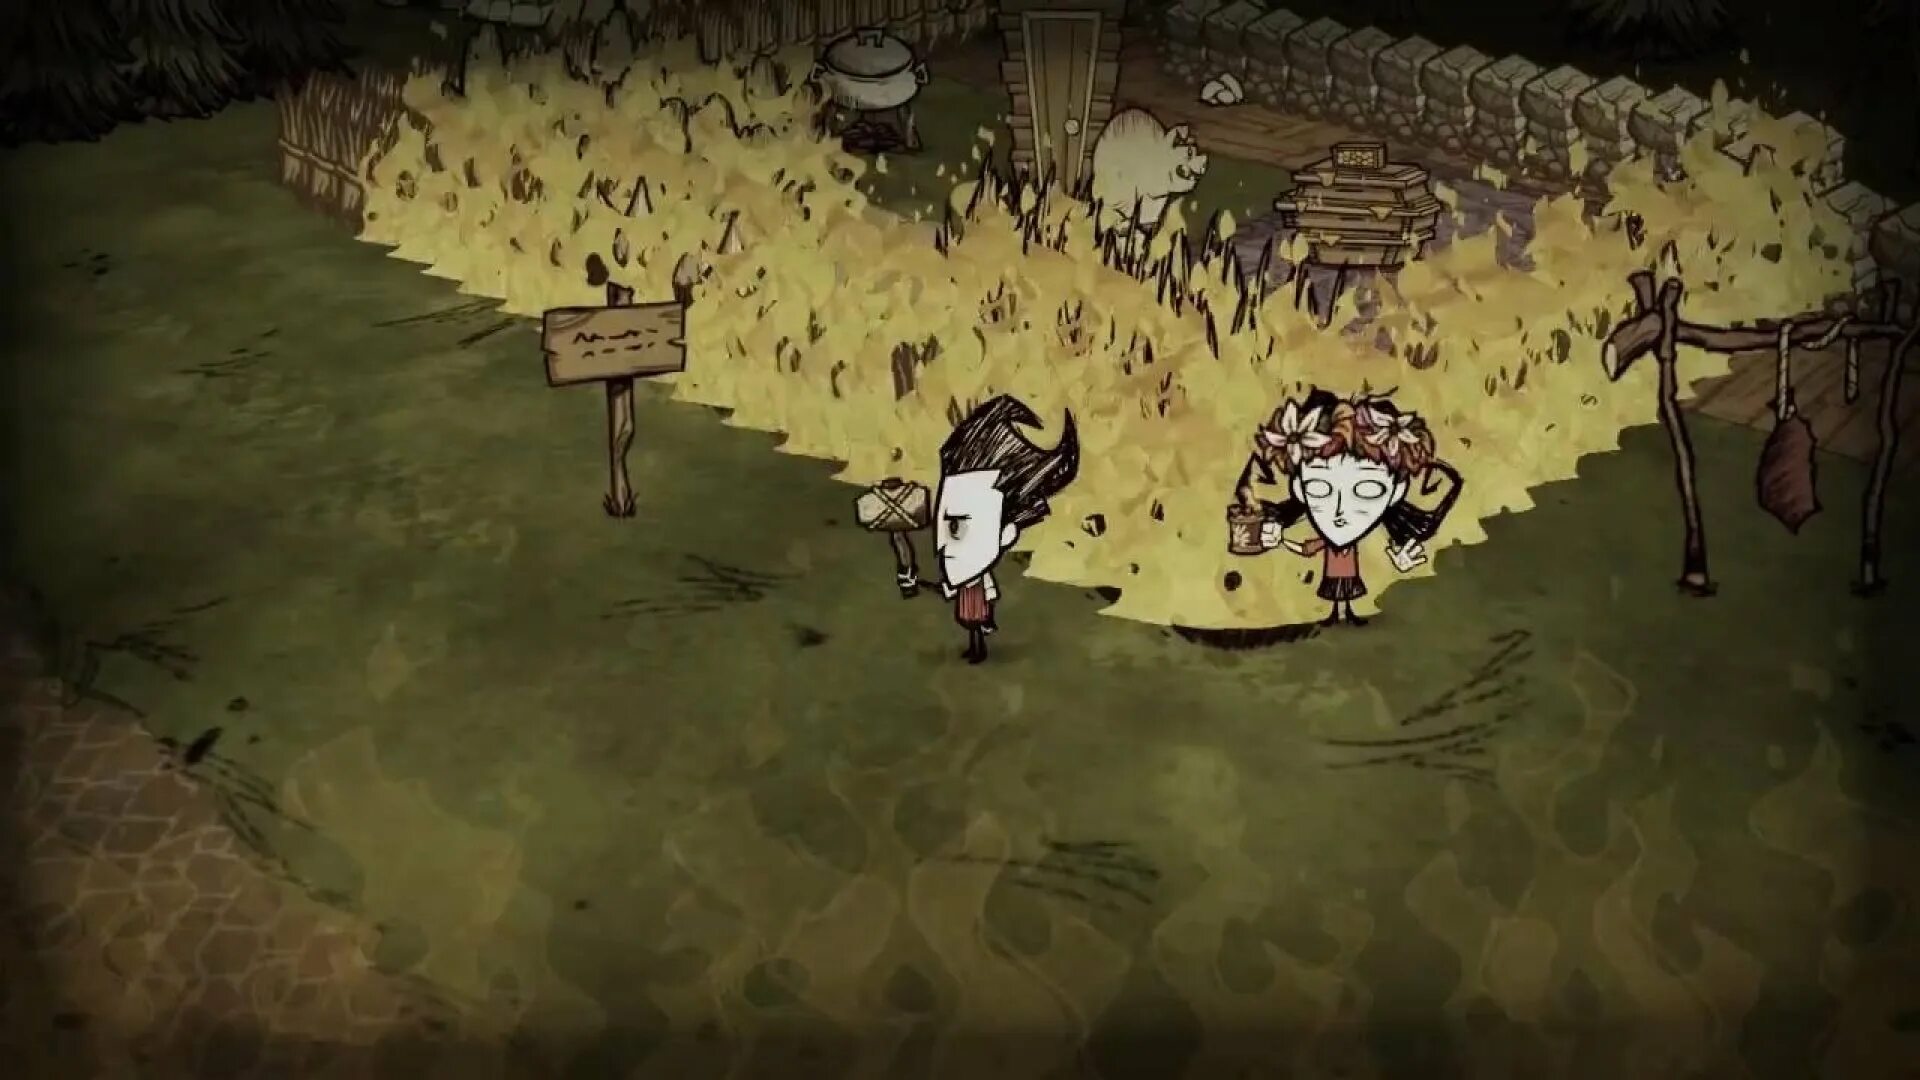 Don't Starve together. Don t Starve игра. Донт старв тугезер. Don't Starve джунгли. Don t starve gaming